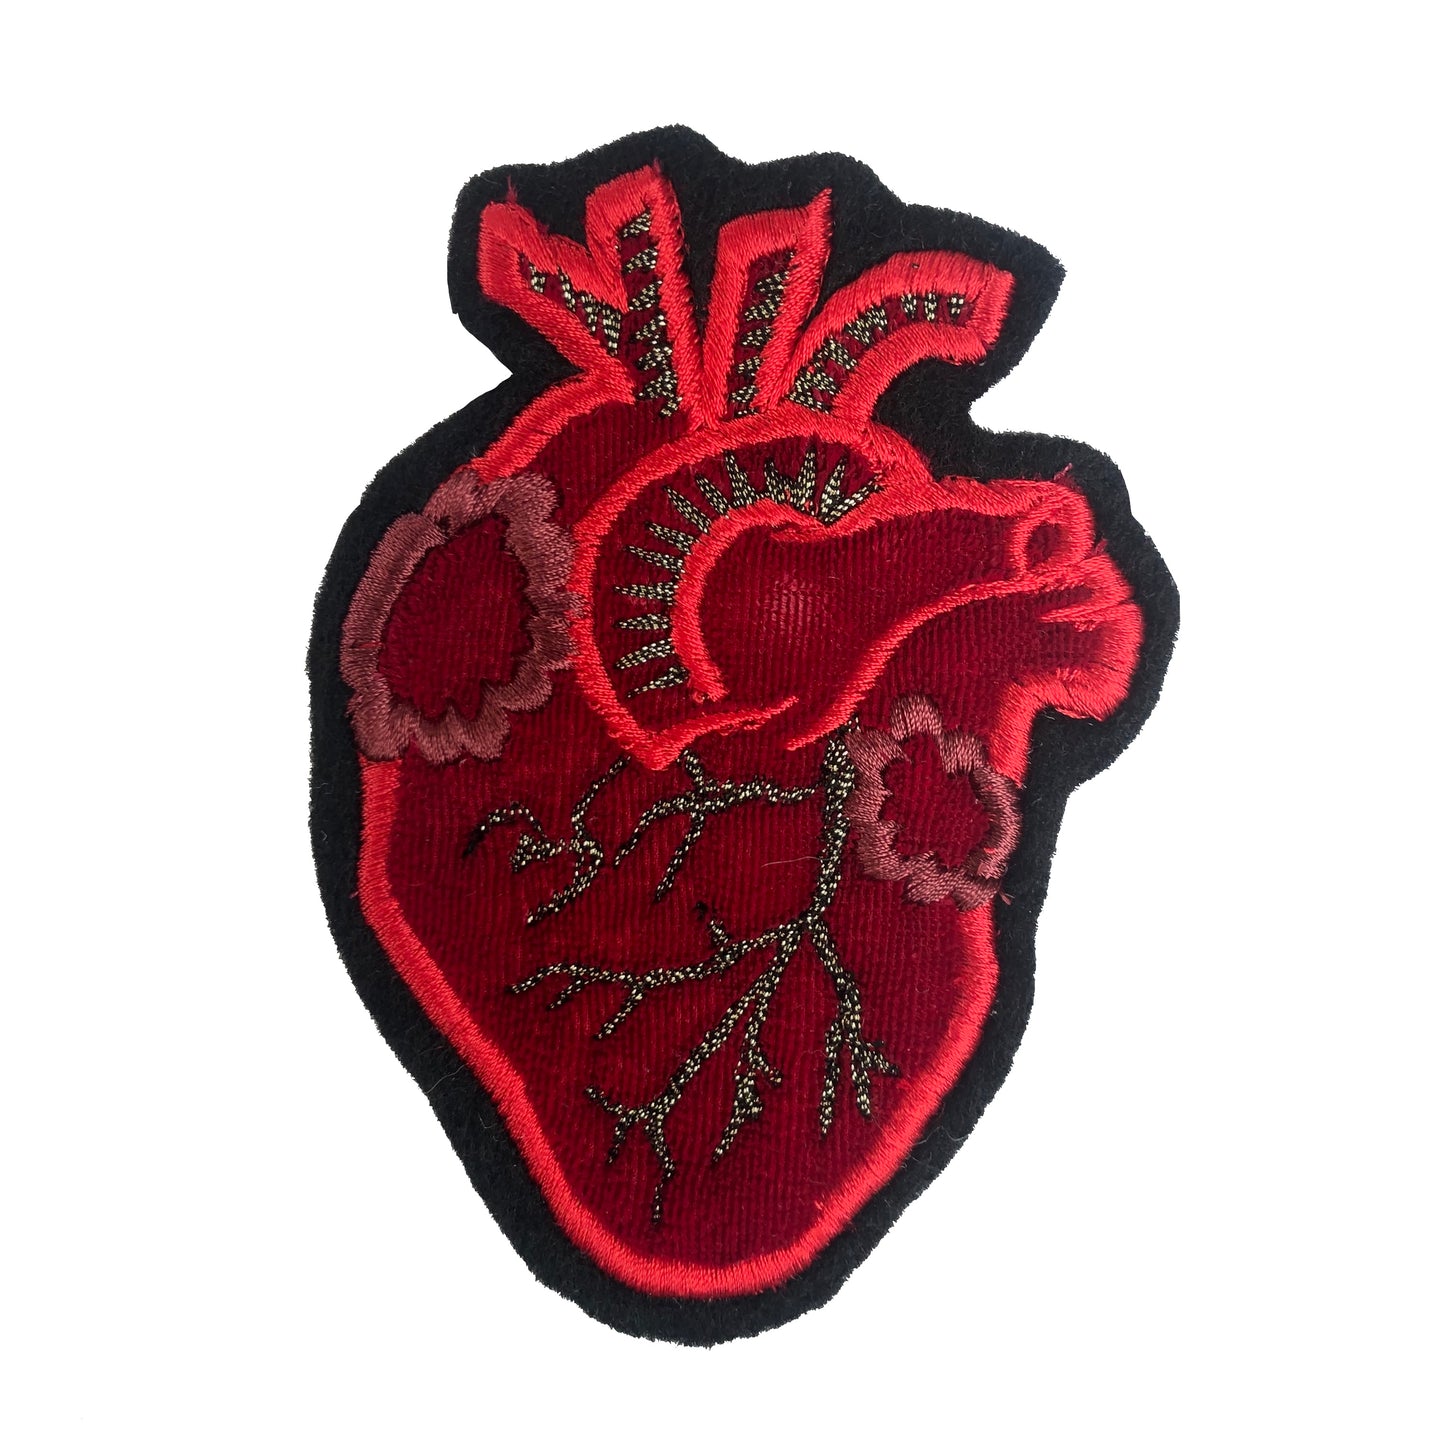 Alice Patches 2.8x2.4 12pcs Pride Rainbow Heart Patches Iron on Embroidered Patches Appliques Machine Embroidery Needlecraft Sewing Girls